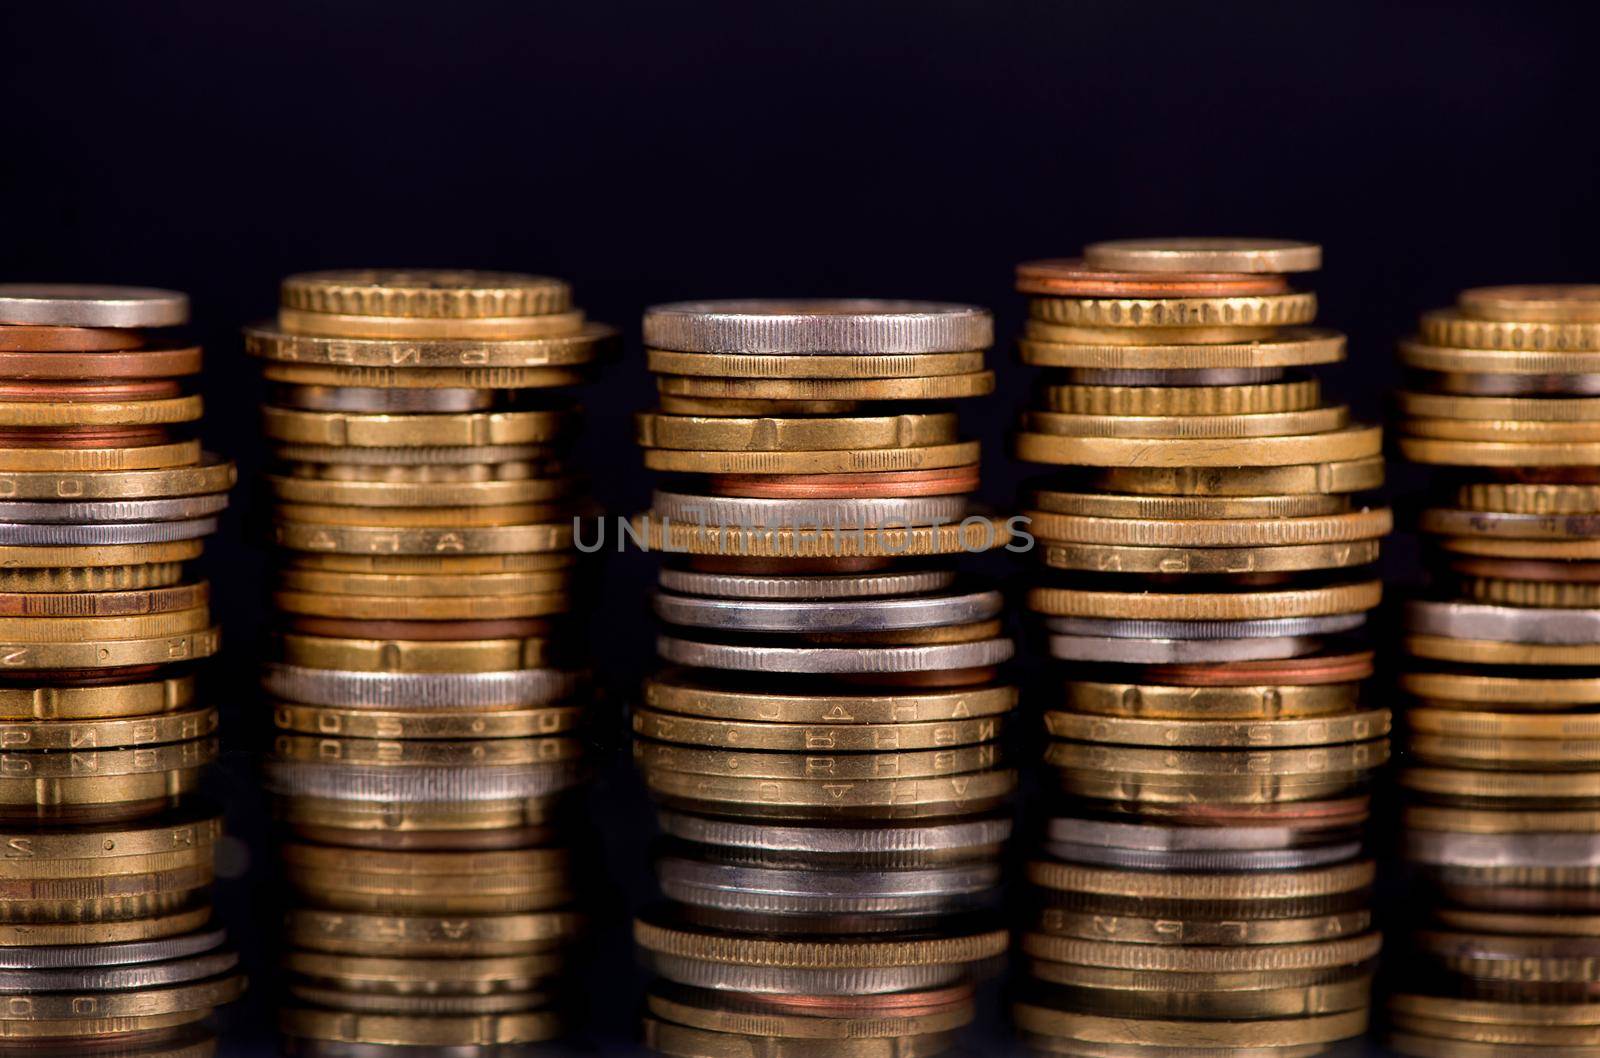 Composition of the coins on the black background